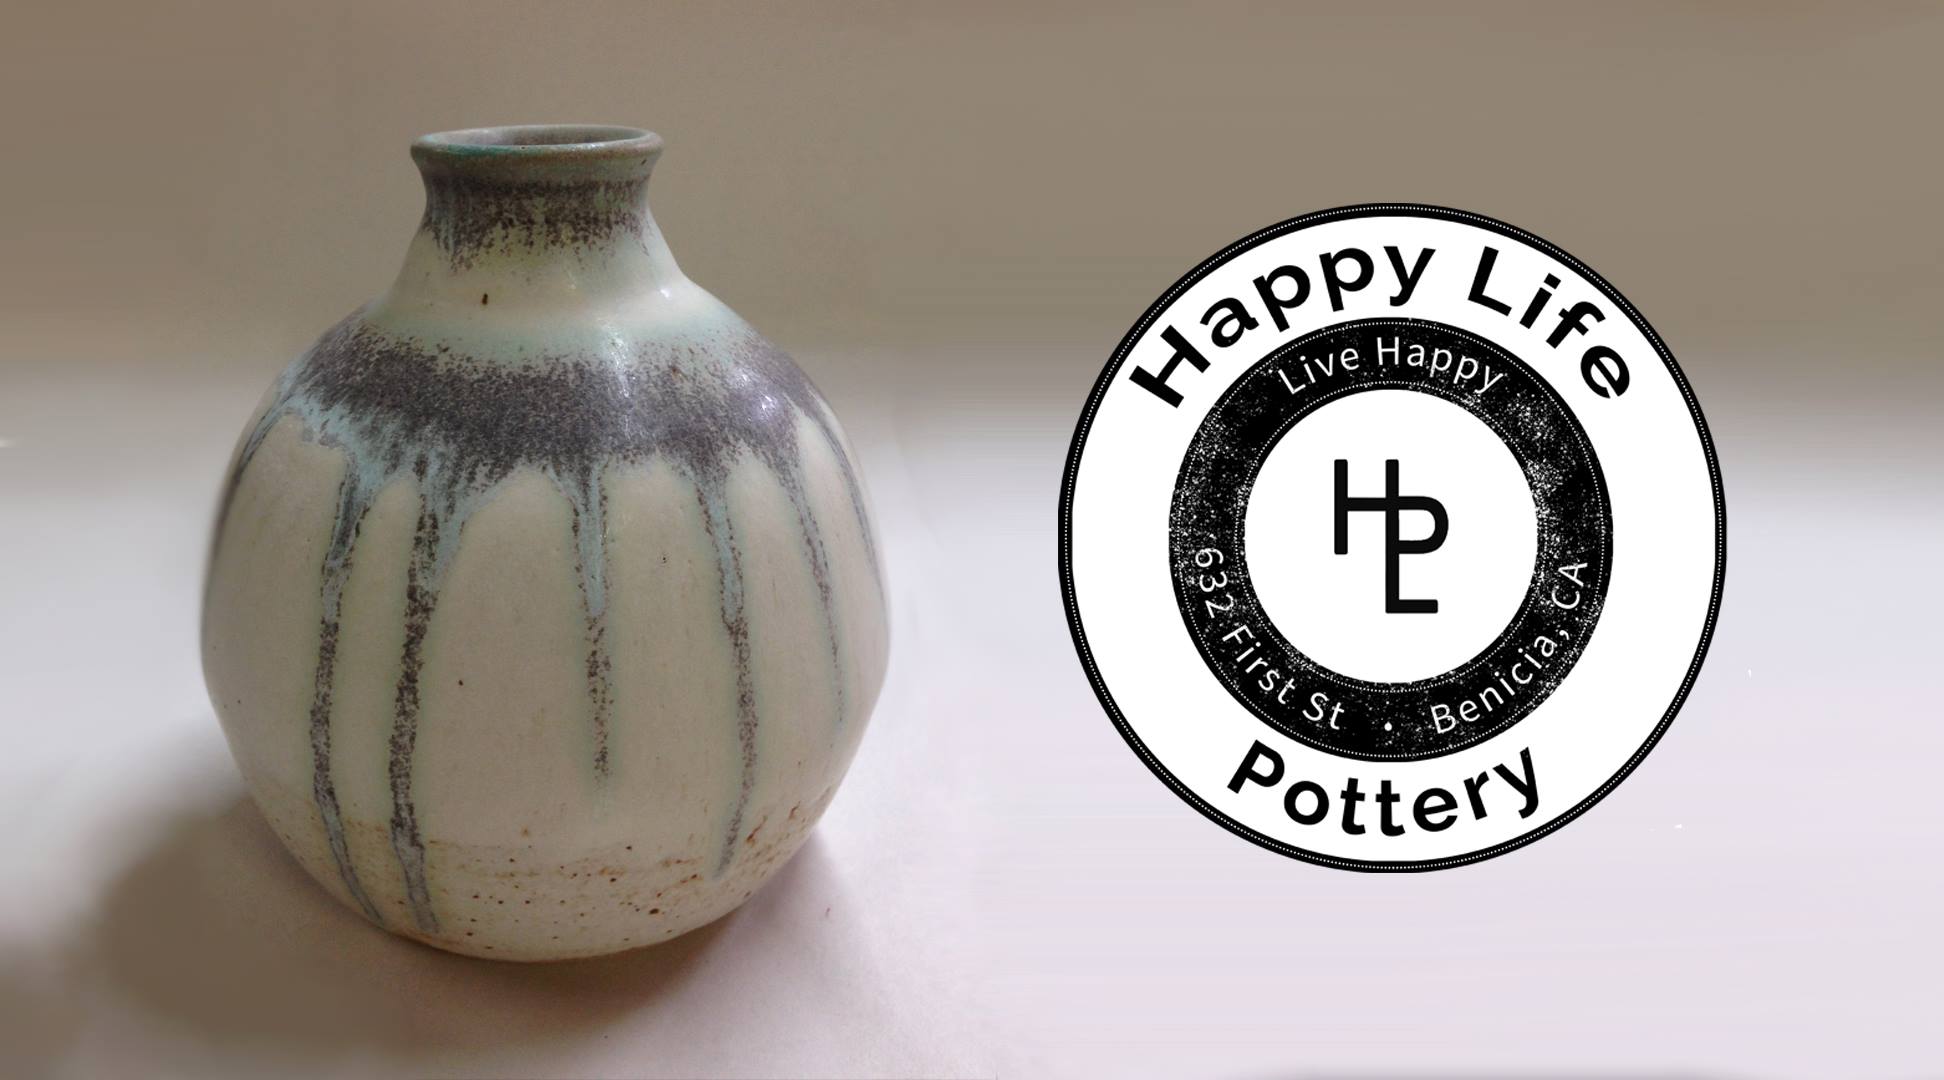 Happy Life Pottery and Gallery